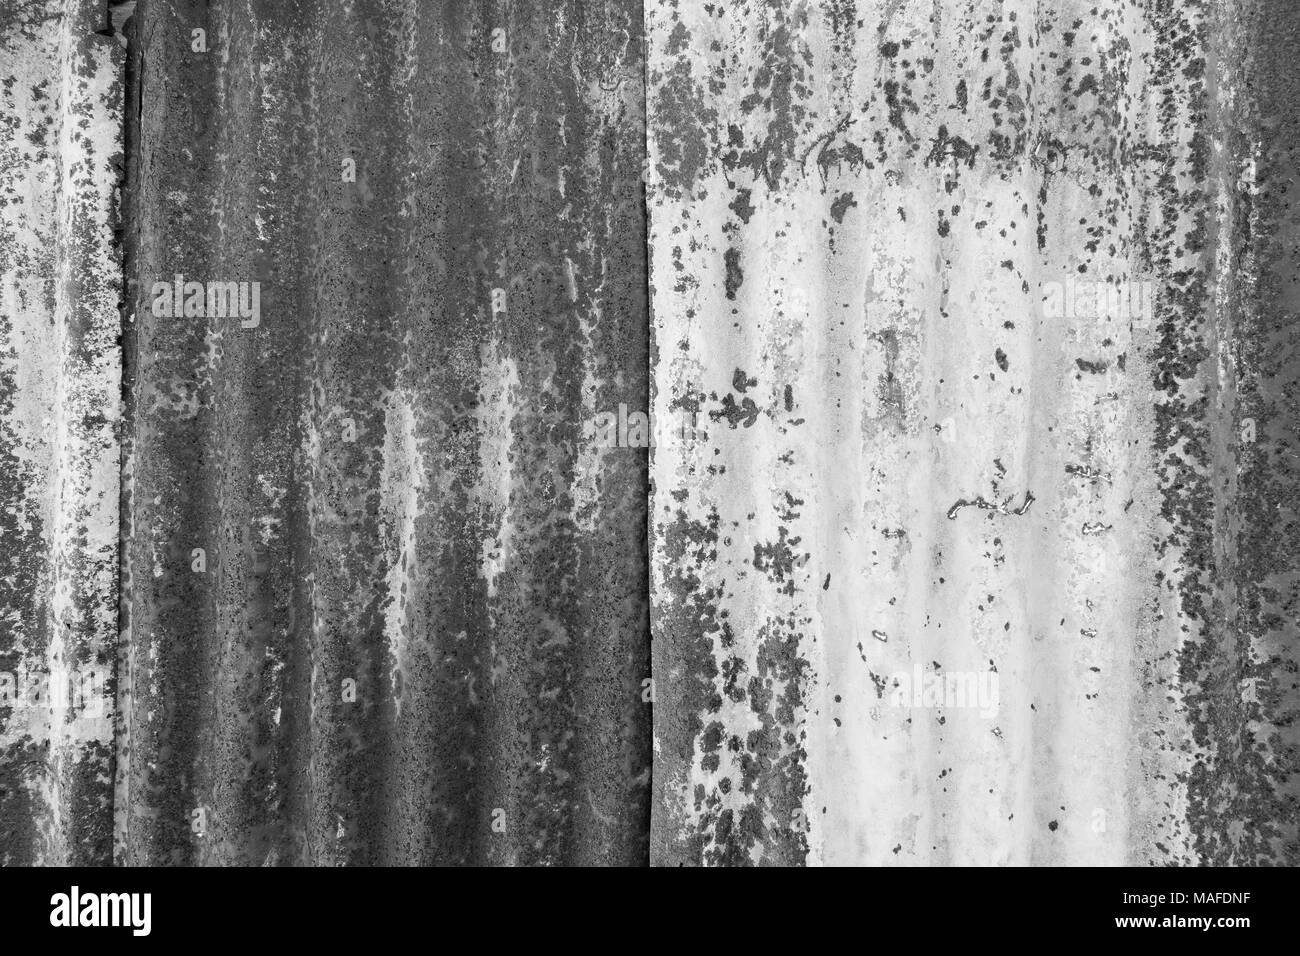 Close-up of a rusty and corrugated iron metal construction site wall texture background in black and white. Stock Photo